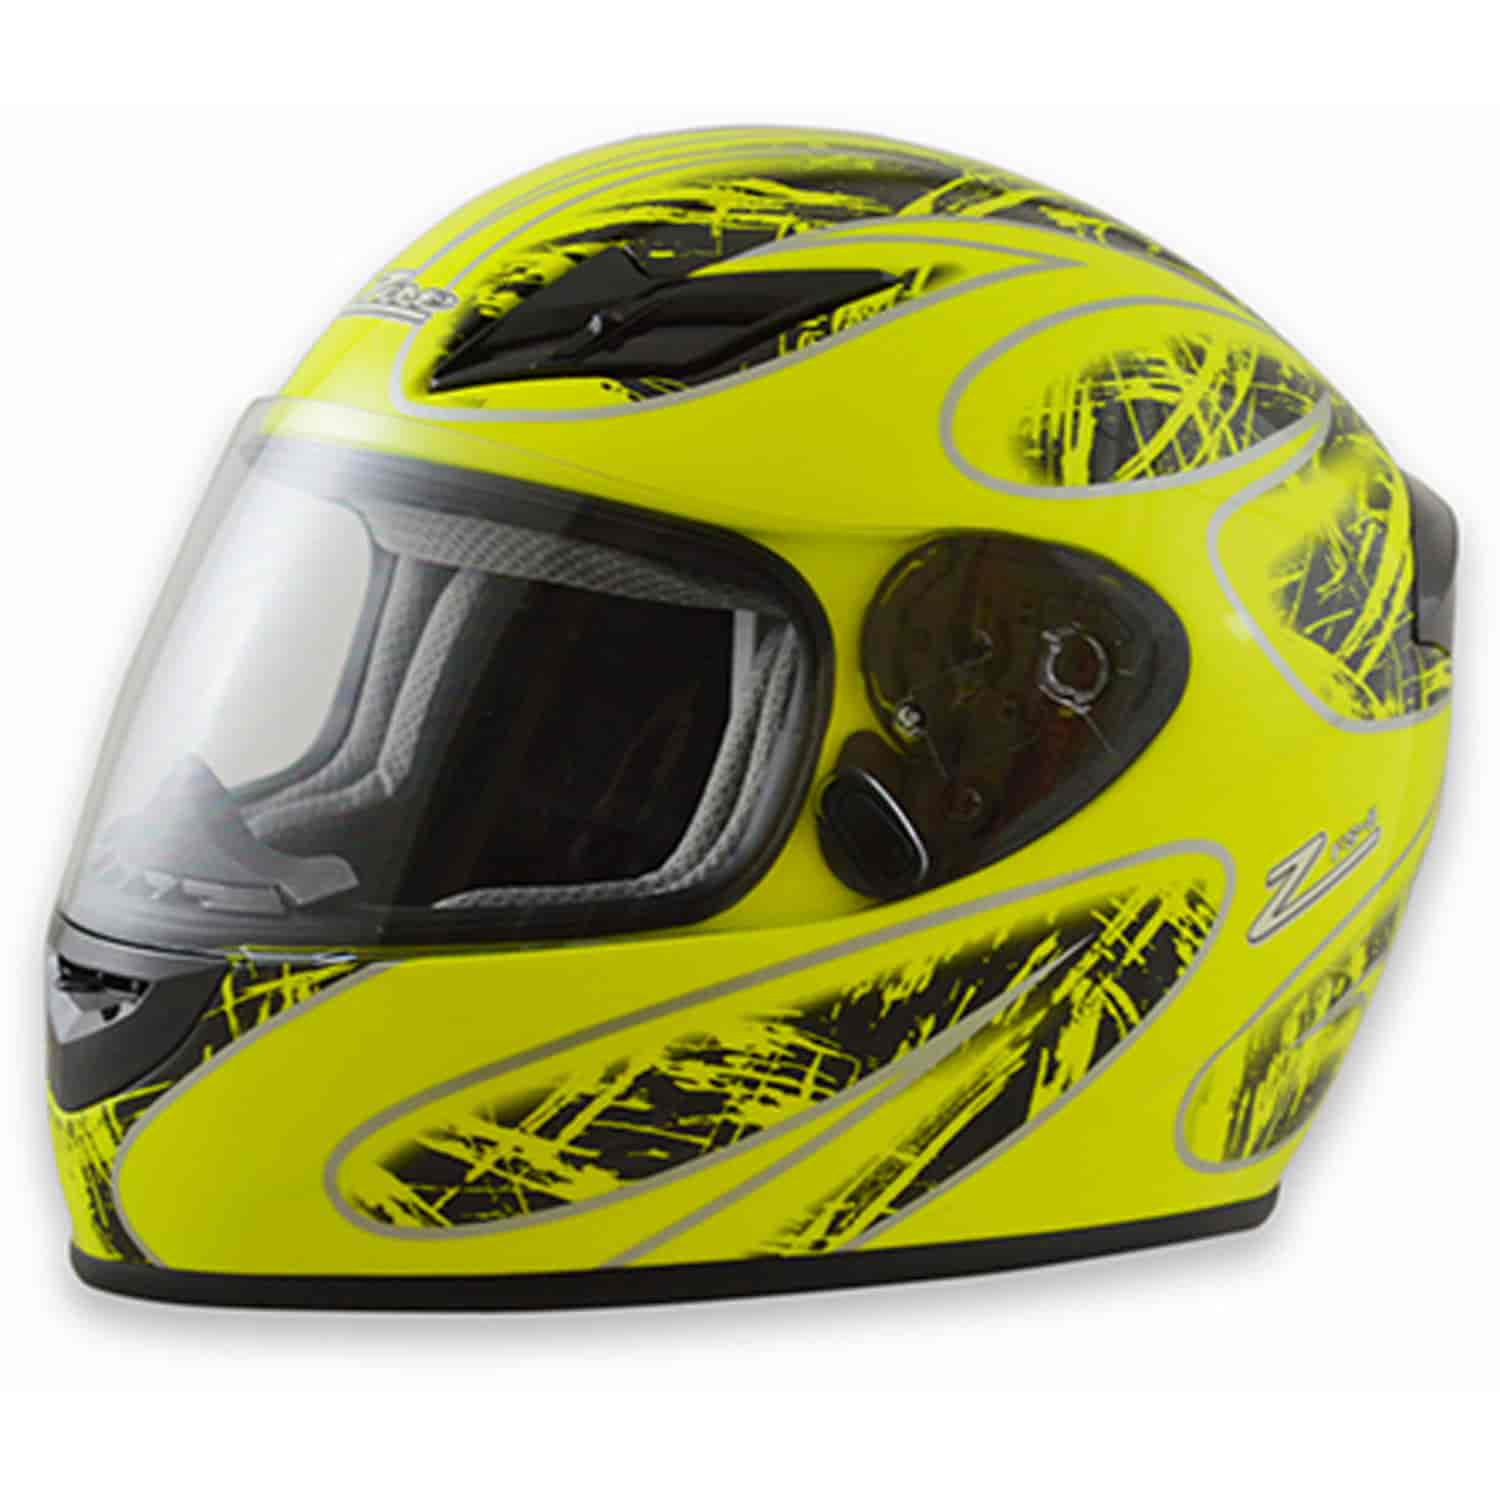 FS-8 Motorcycle Helmet M2015 and DOT Certified